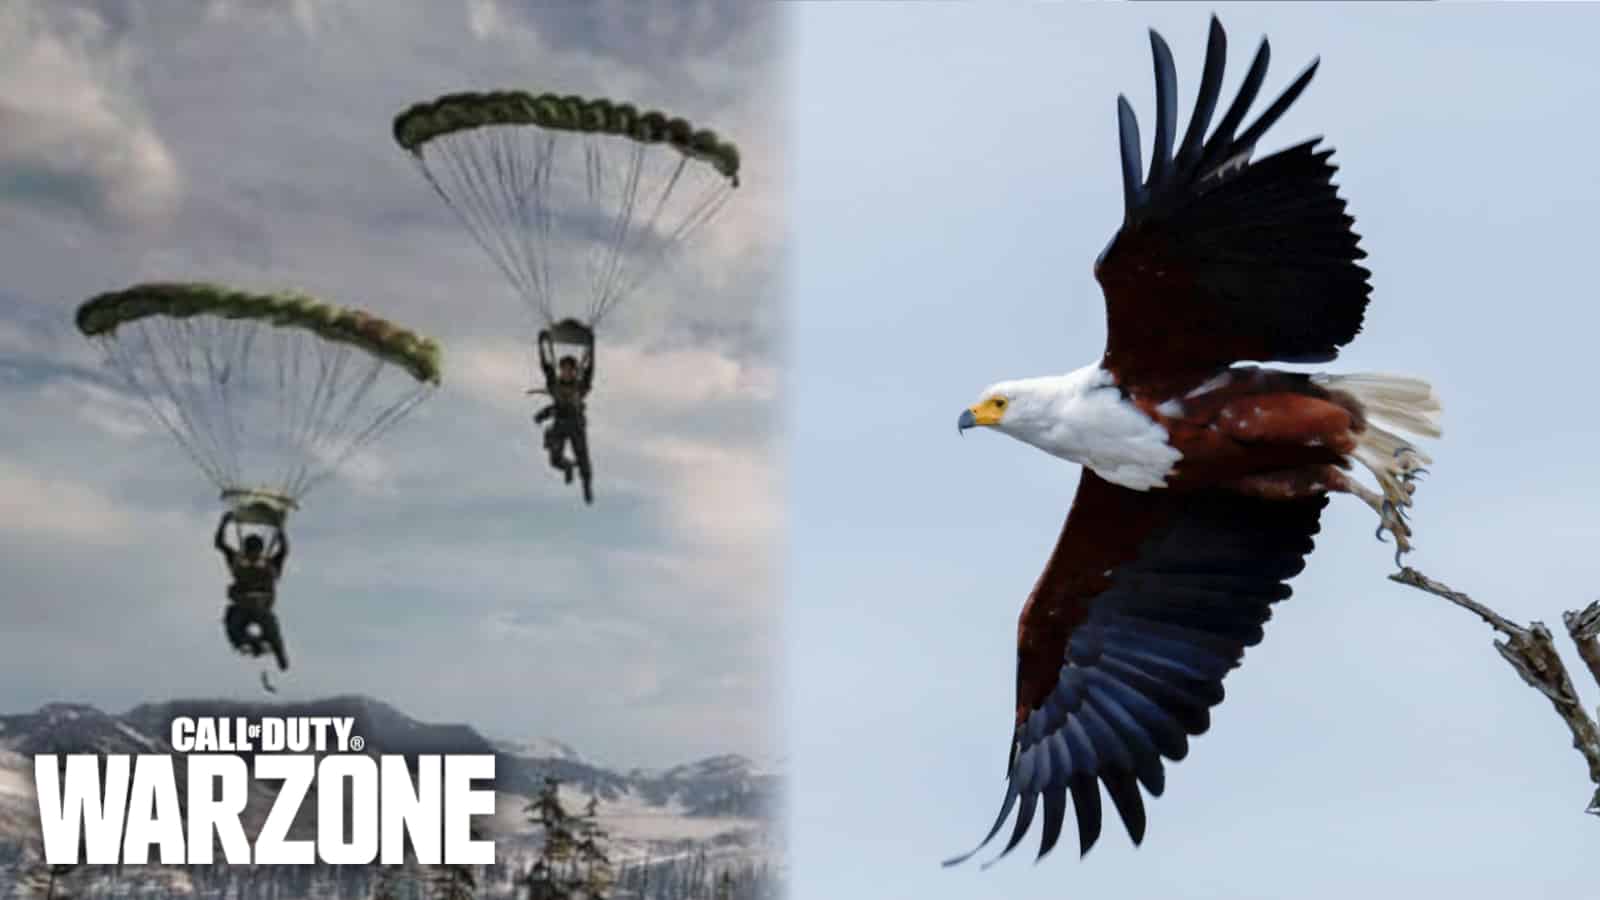 Warzone fans mindblown as player turns into bird while parachuting